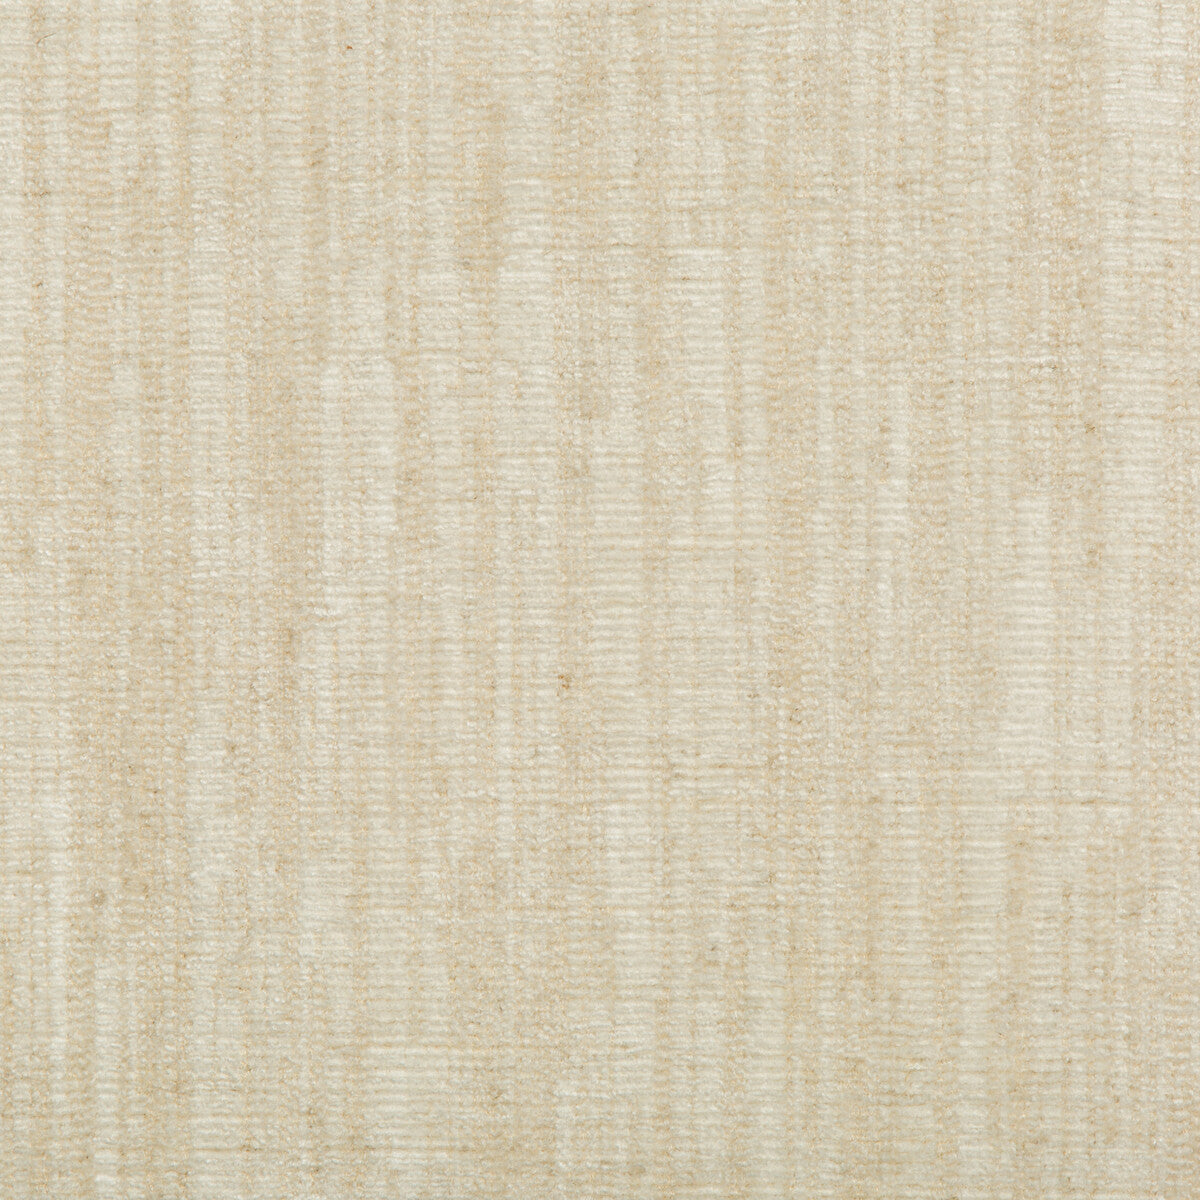 Now And Zen fabric in alabaster color - pattern 35445.1.0 - by Kravet Couture in the Izu Collection collection